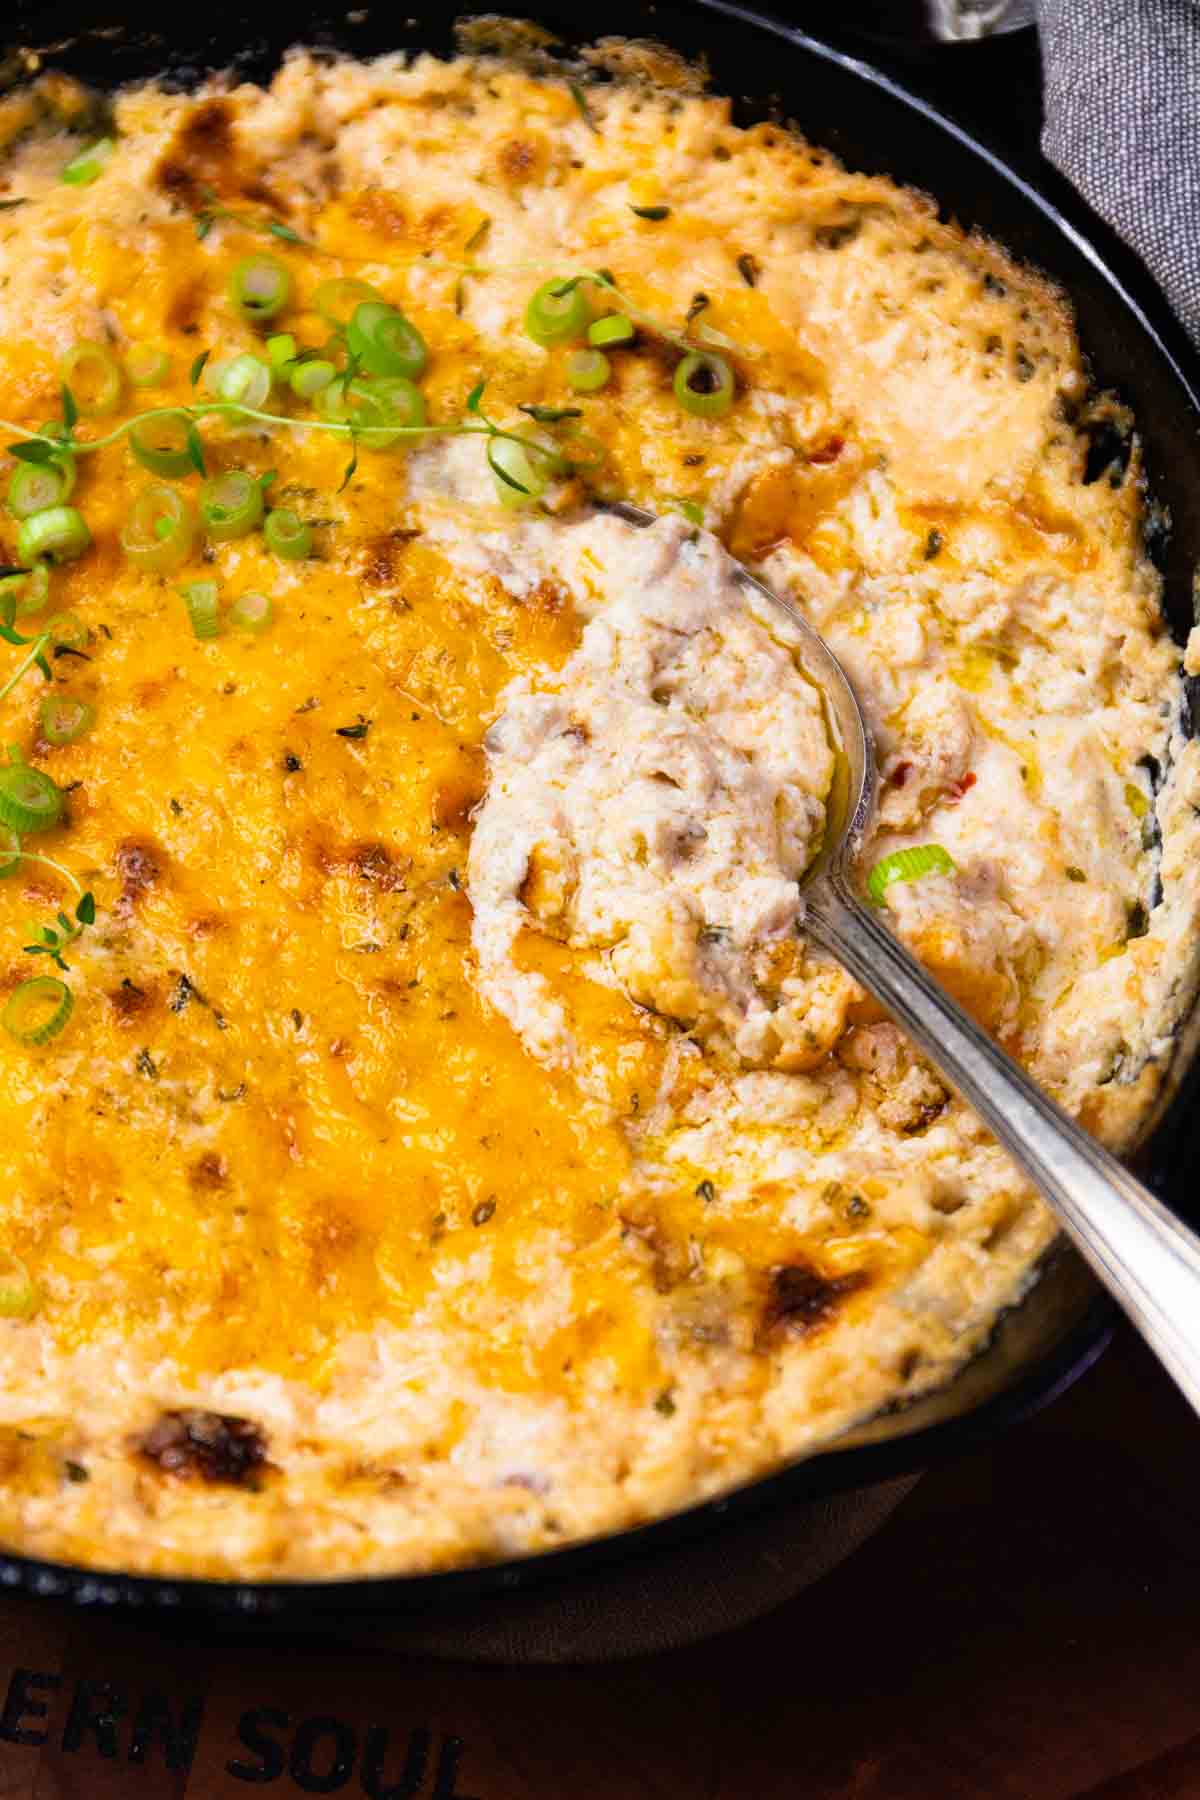 Cast iron skillet full of cheesy baked crab dip with spoon scooping out a spoonful.